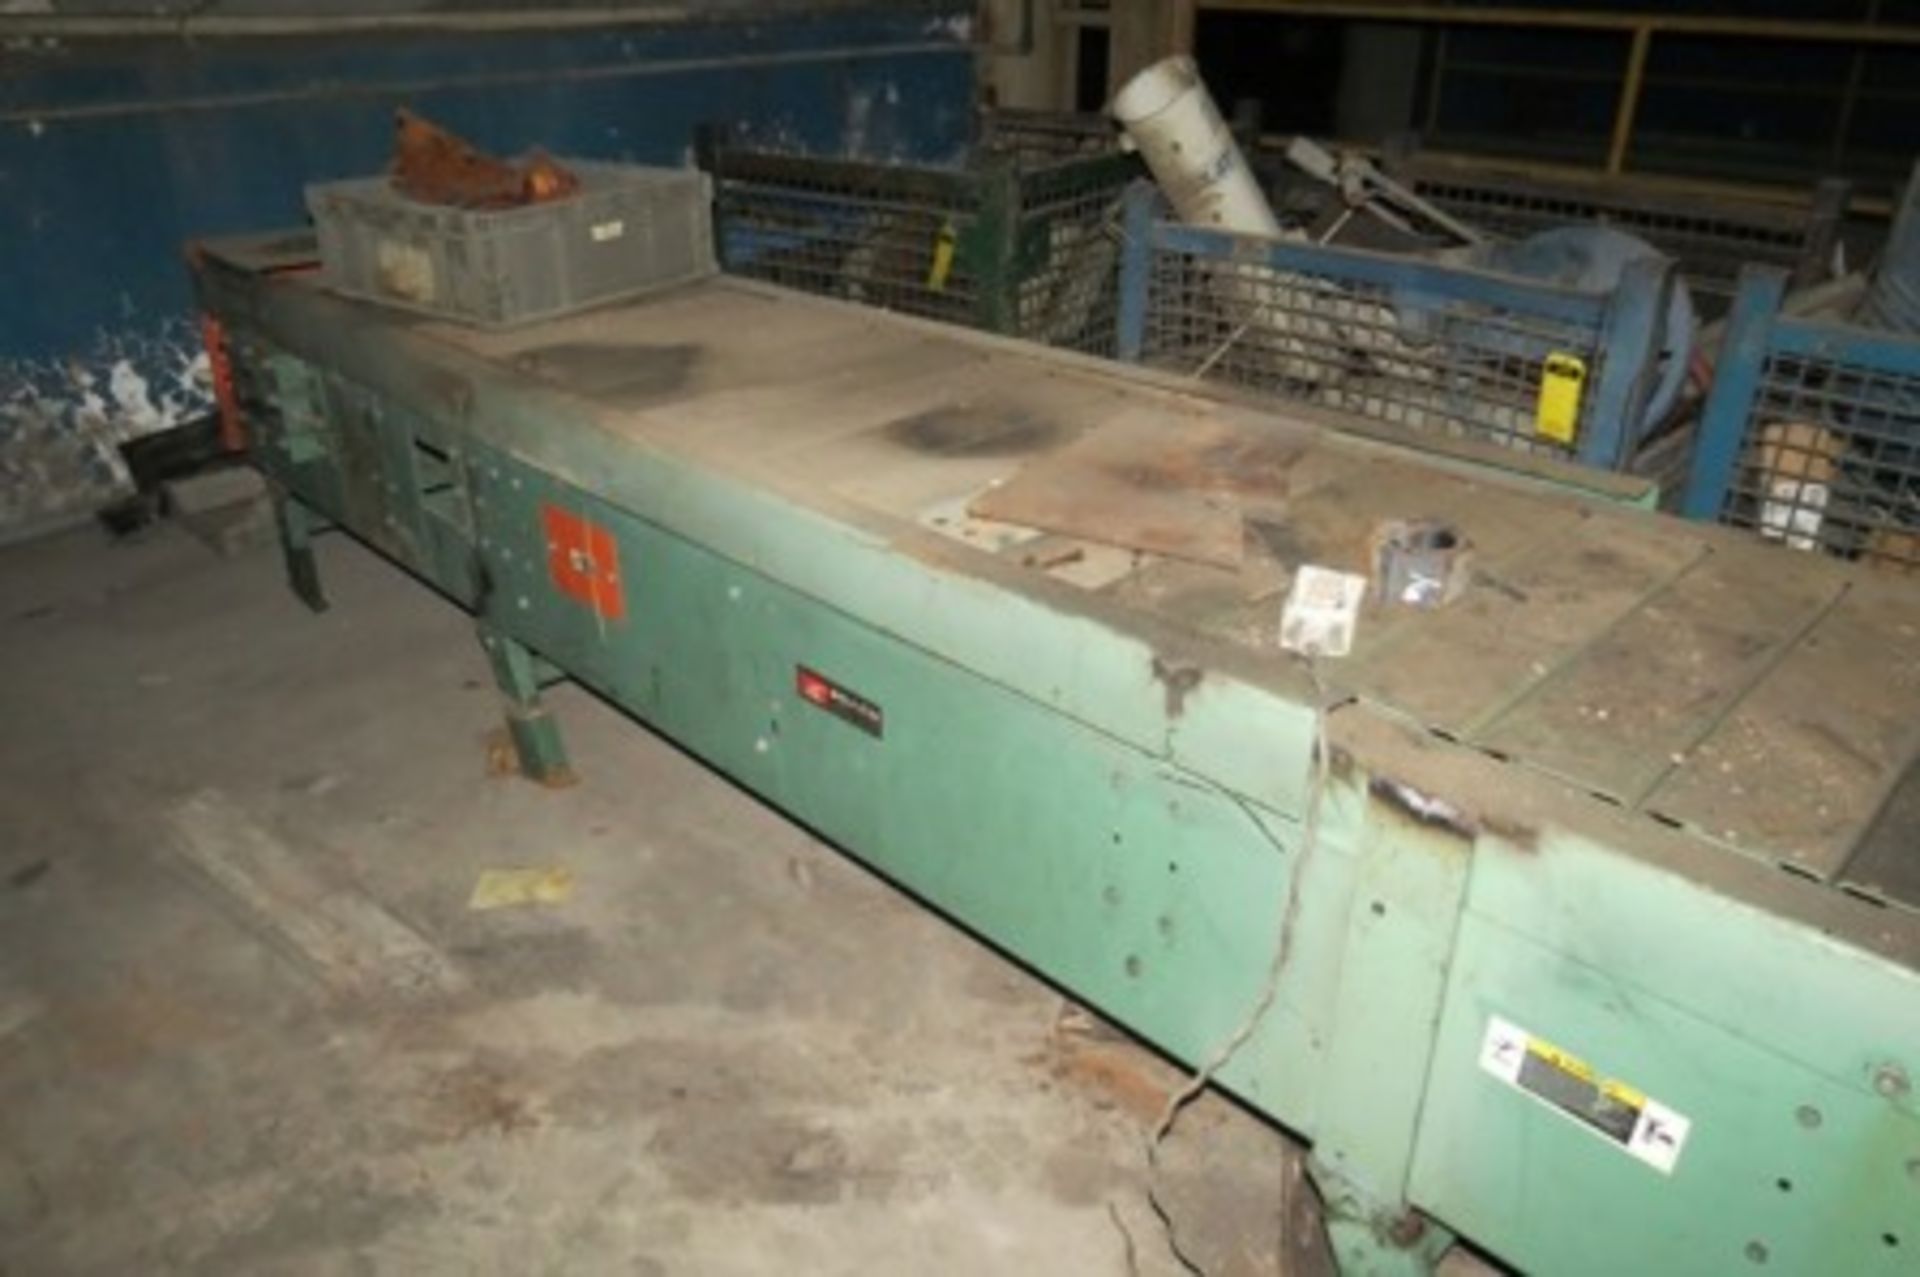 Electric motor 50 hp. Spare parts for die casting machines. Belt conveyor - Image 13 of 19